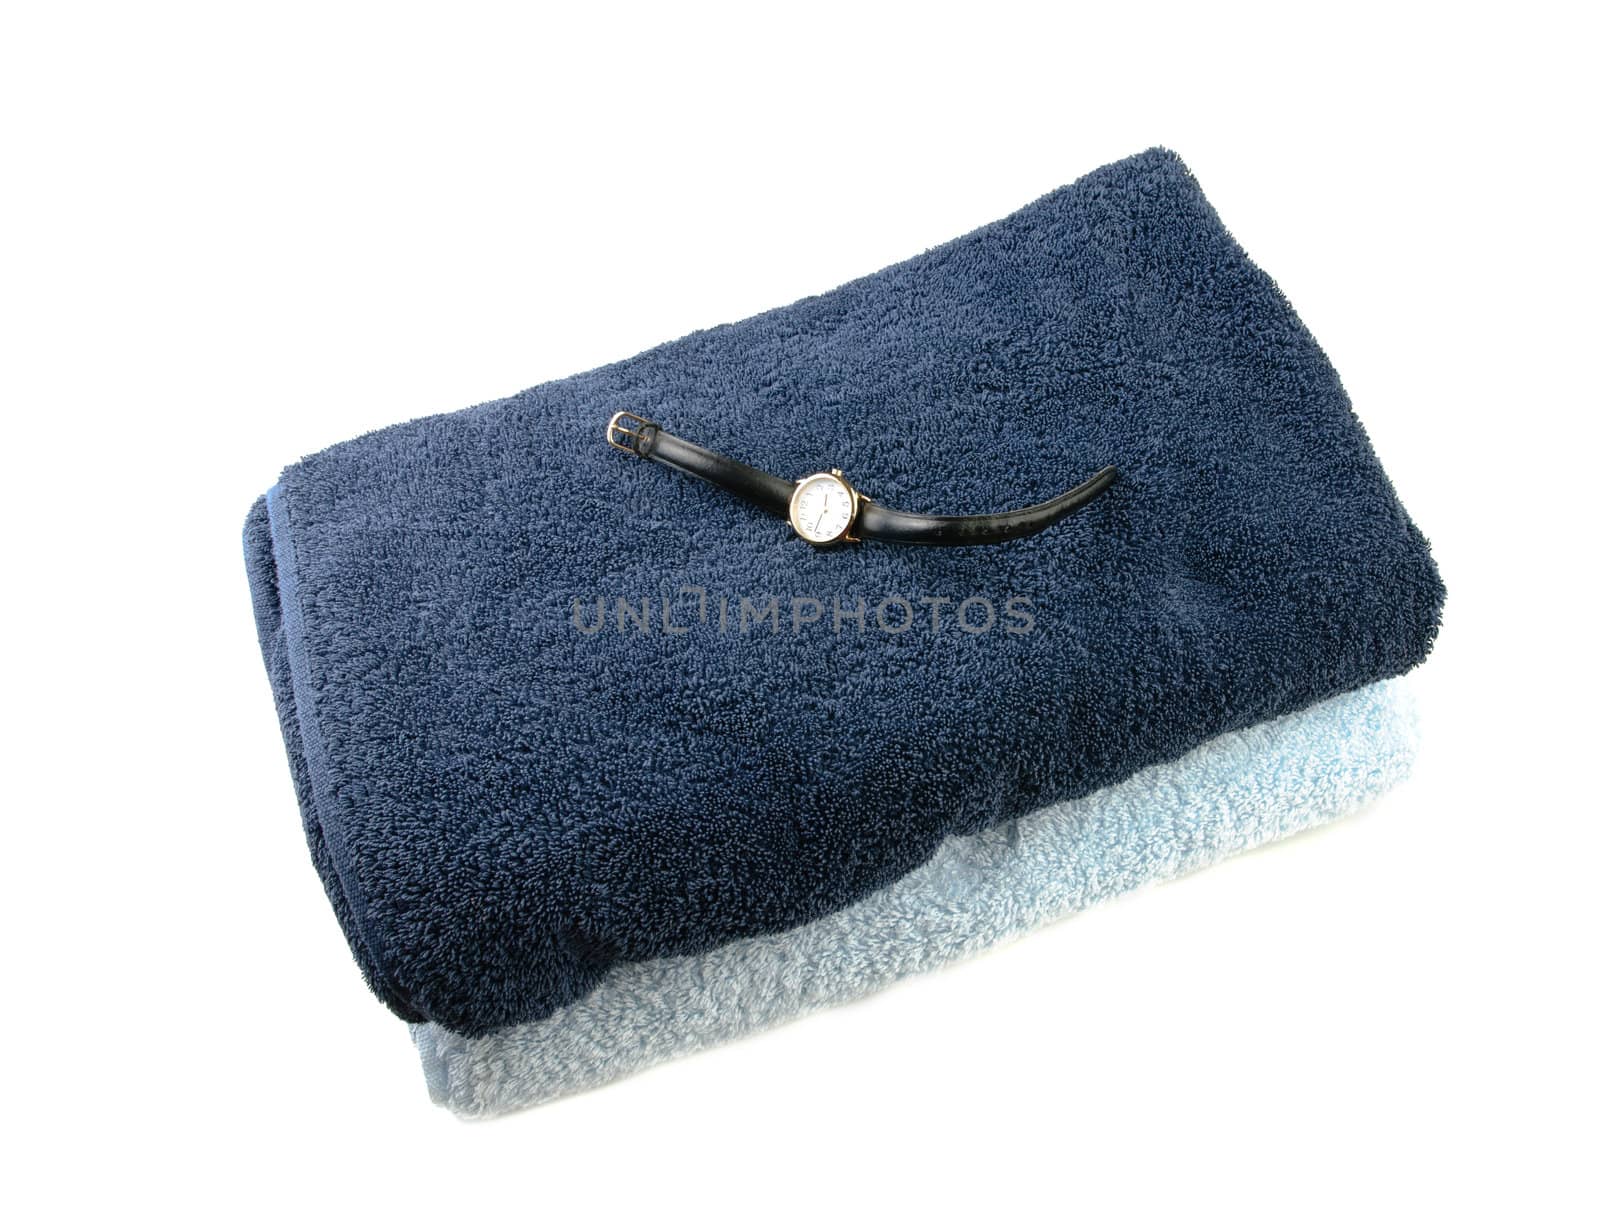 Bath time concept with two towels and a watch, isolated against a white background.